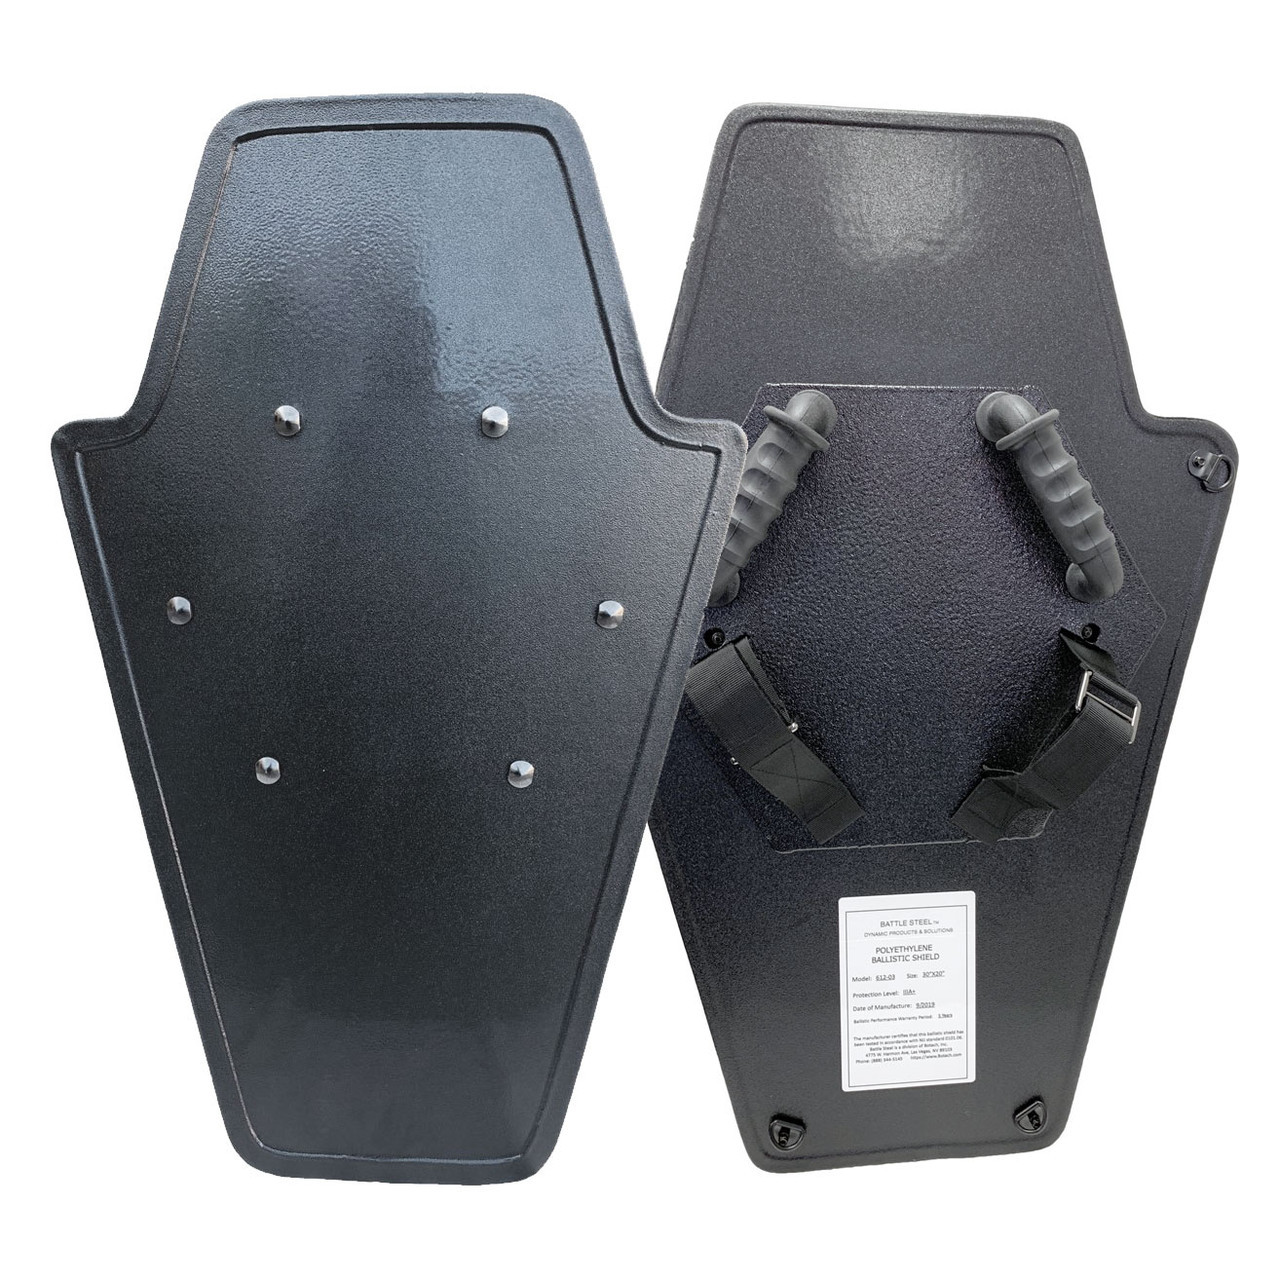 Ballistic Shield With View Port Level III 30x20 buy with delivery to the  USA - BATTLE STEEL®️